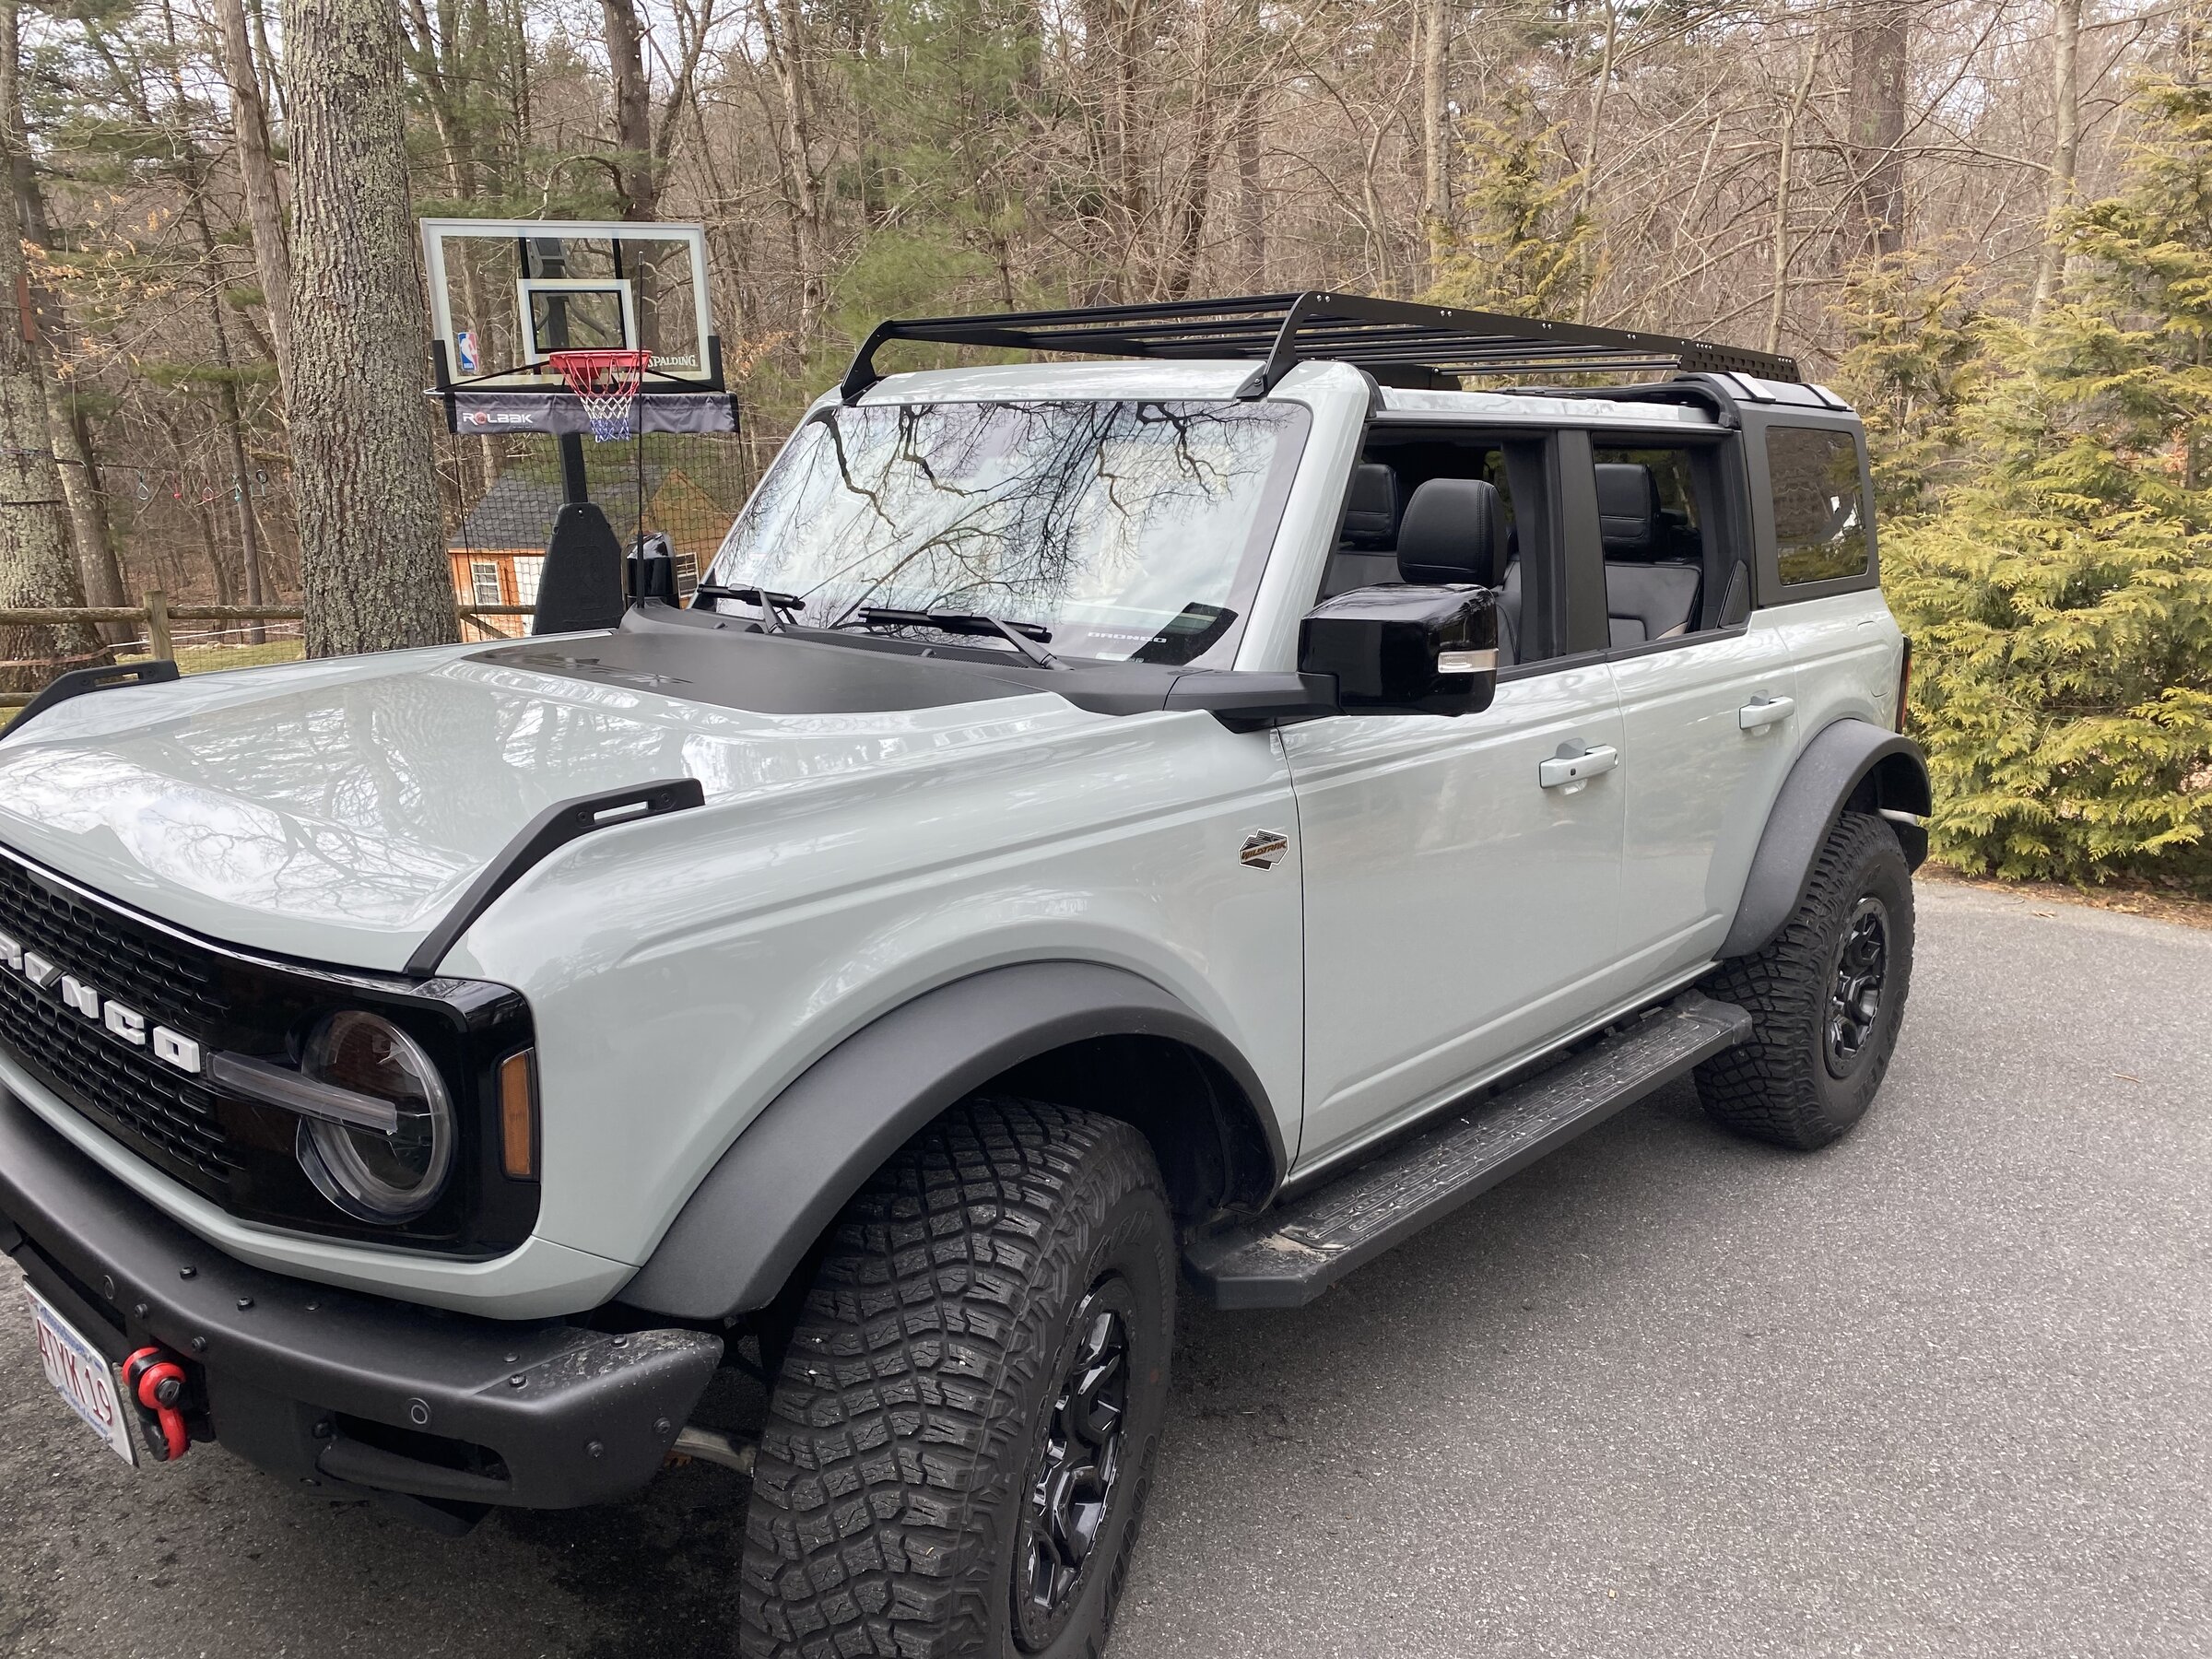 Ford Bronco Full Review w/Pics and Video: Badass Tents Roof Rack IMG_9648.JPG